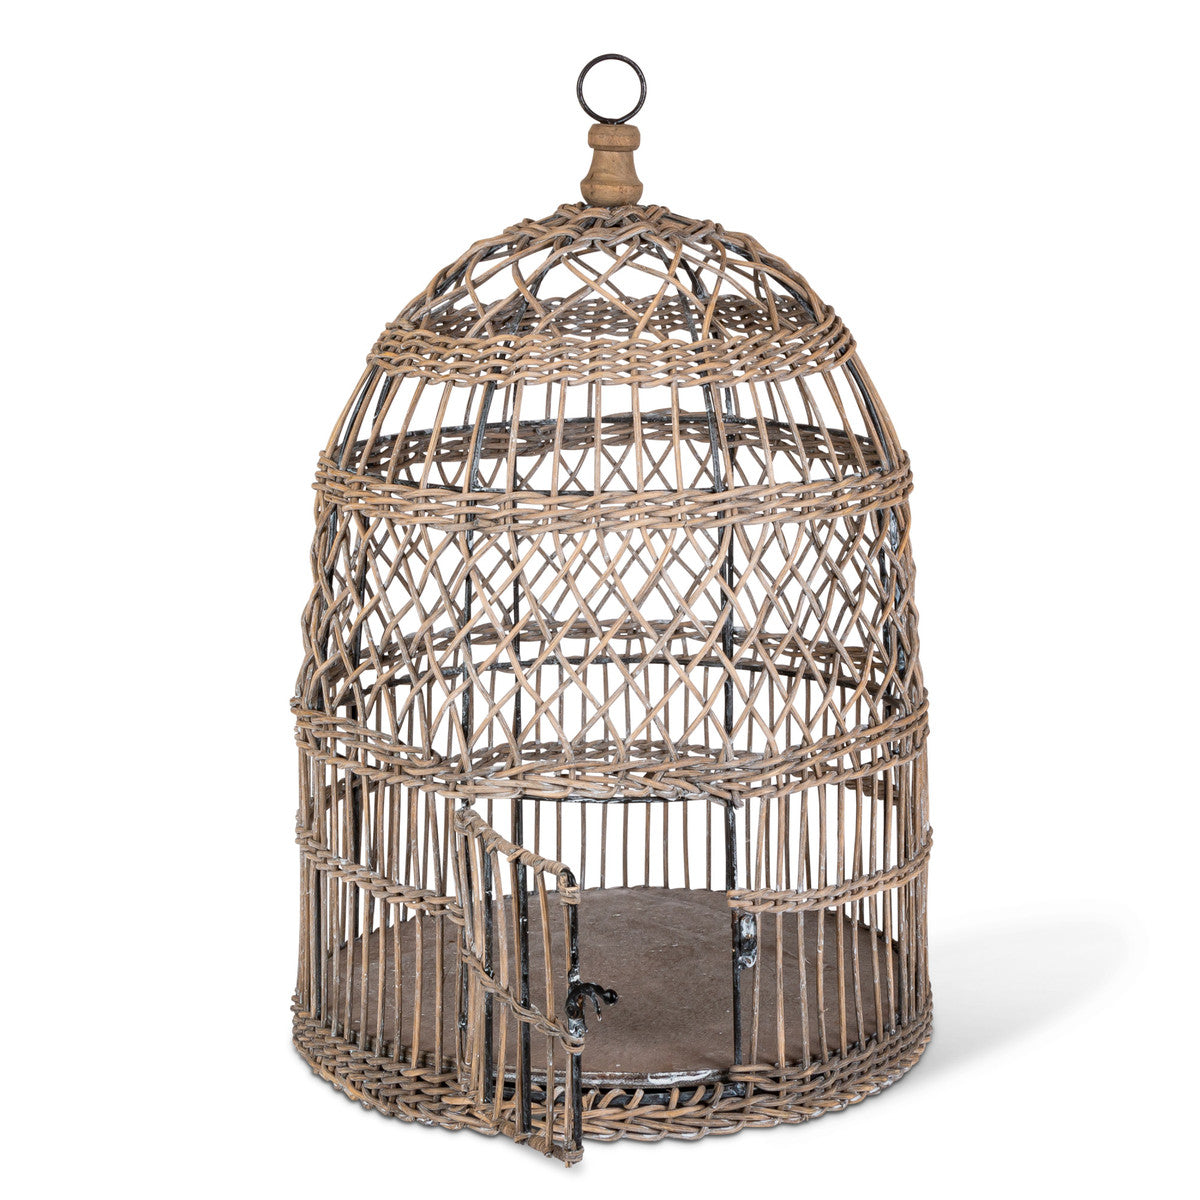 Wicker and Metal Bird Cage